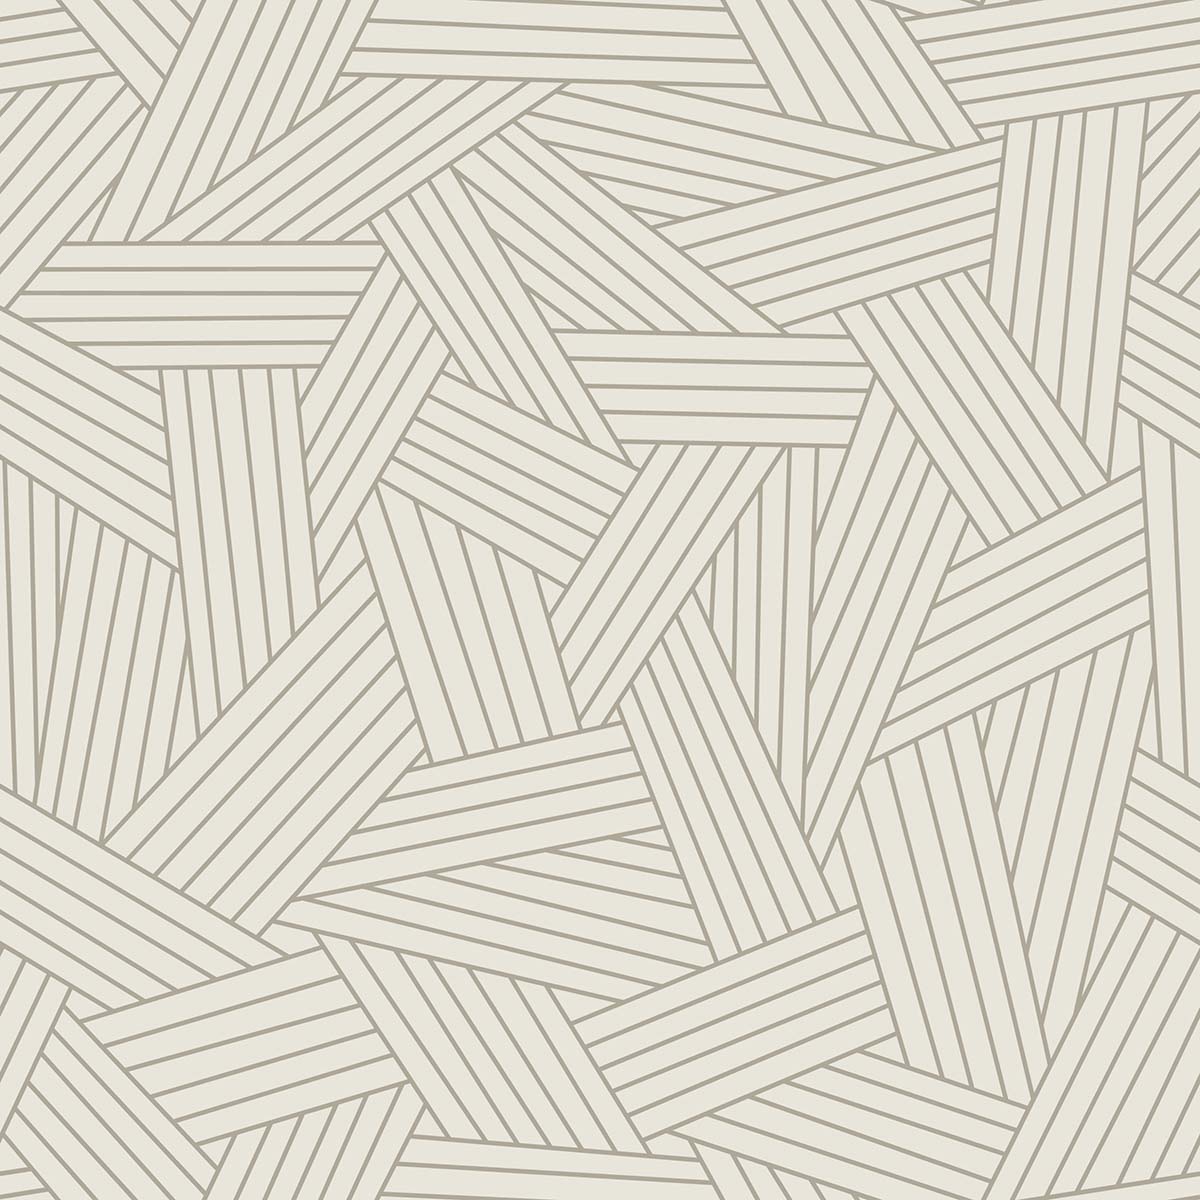 A pattern of lines on a white surface